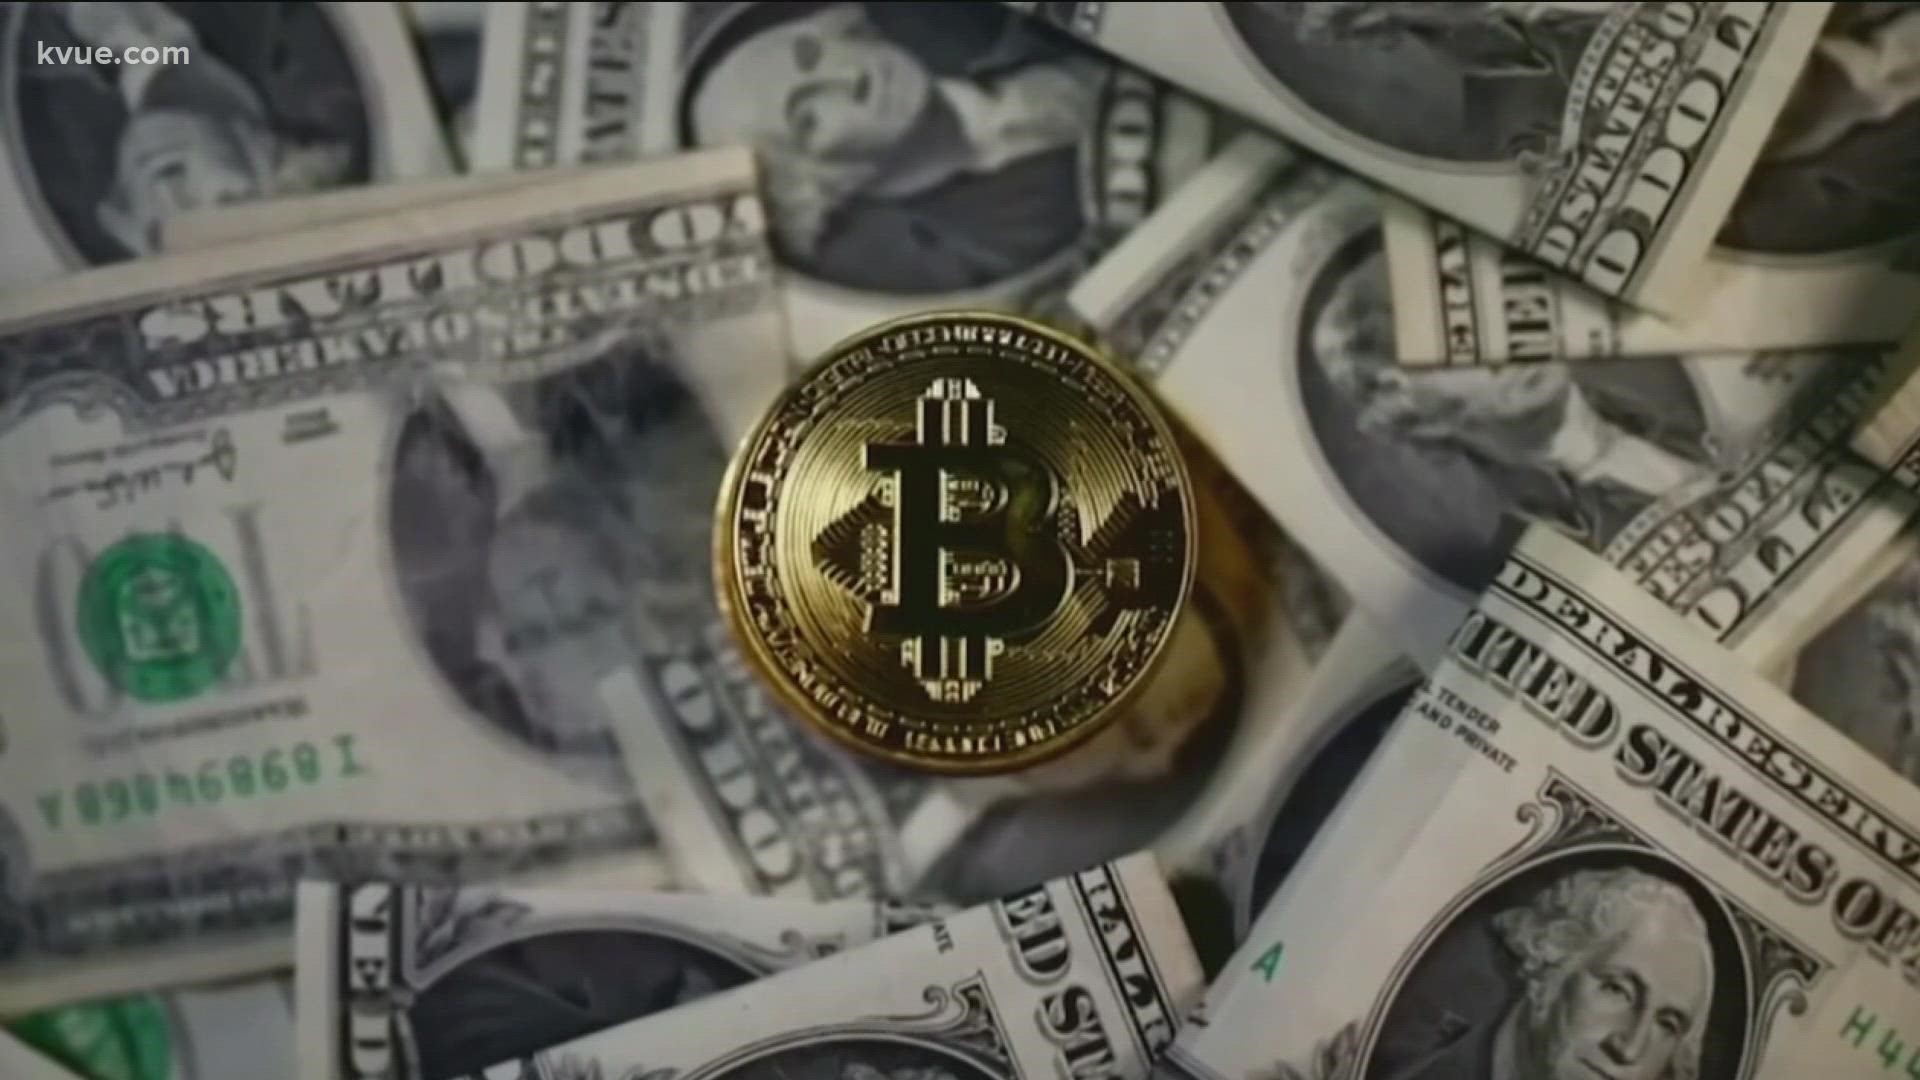 Cryptocurrencies like Bitcoin are booming. Now, the U.S. is looking into creating its own digital dollar.